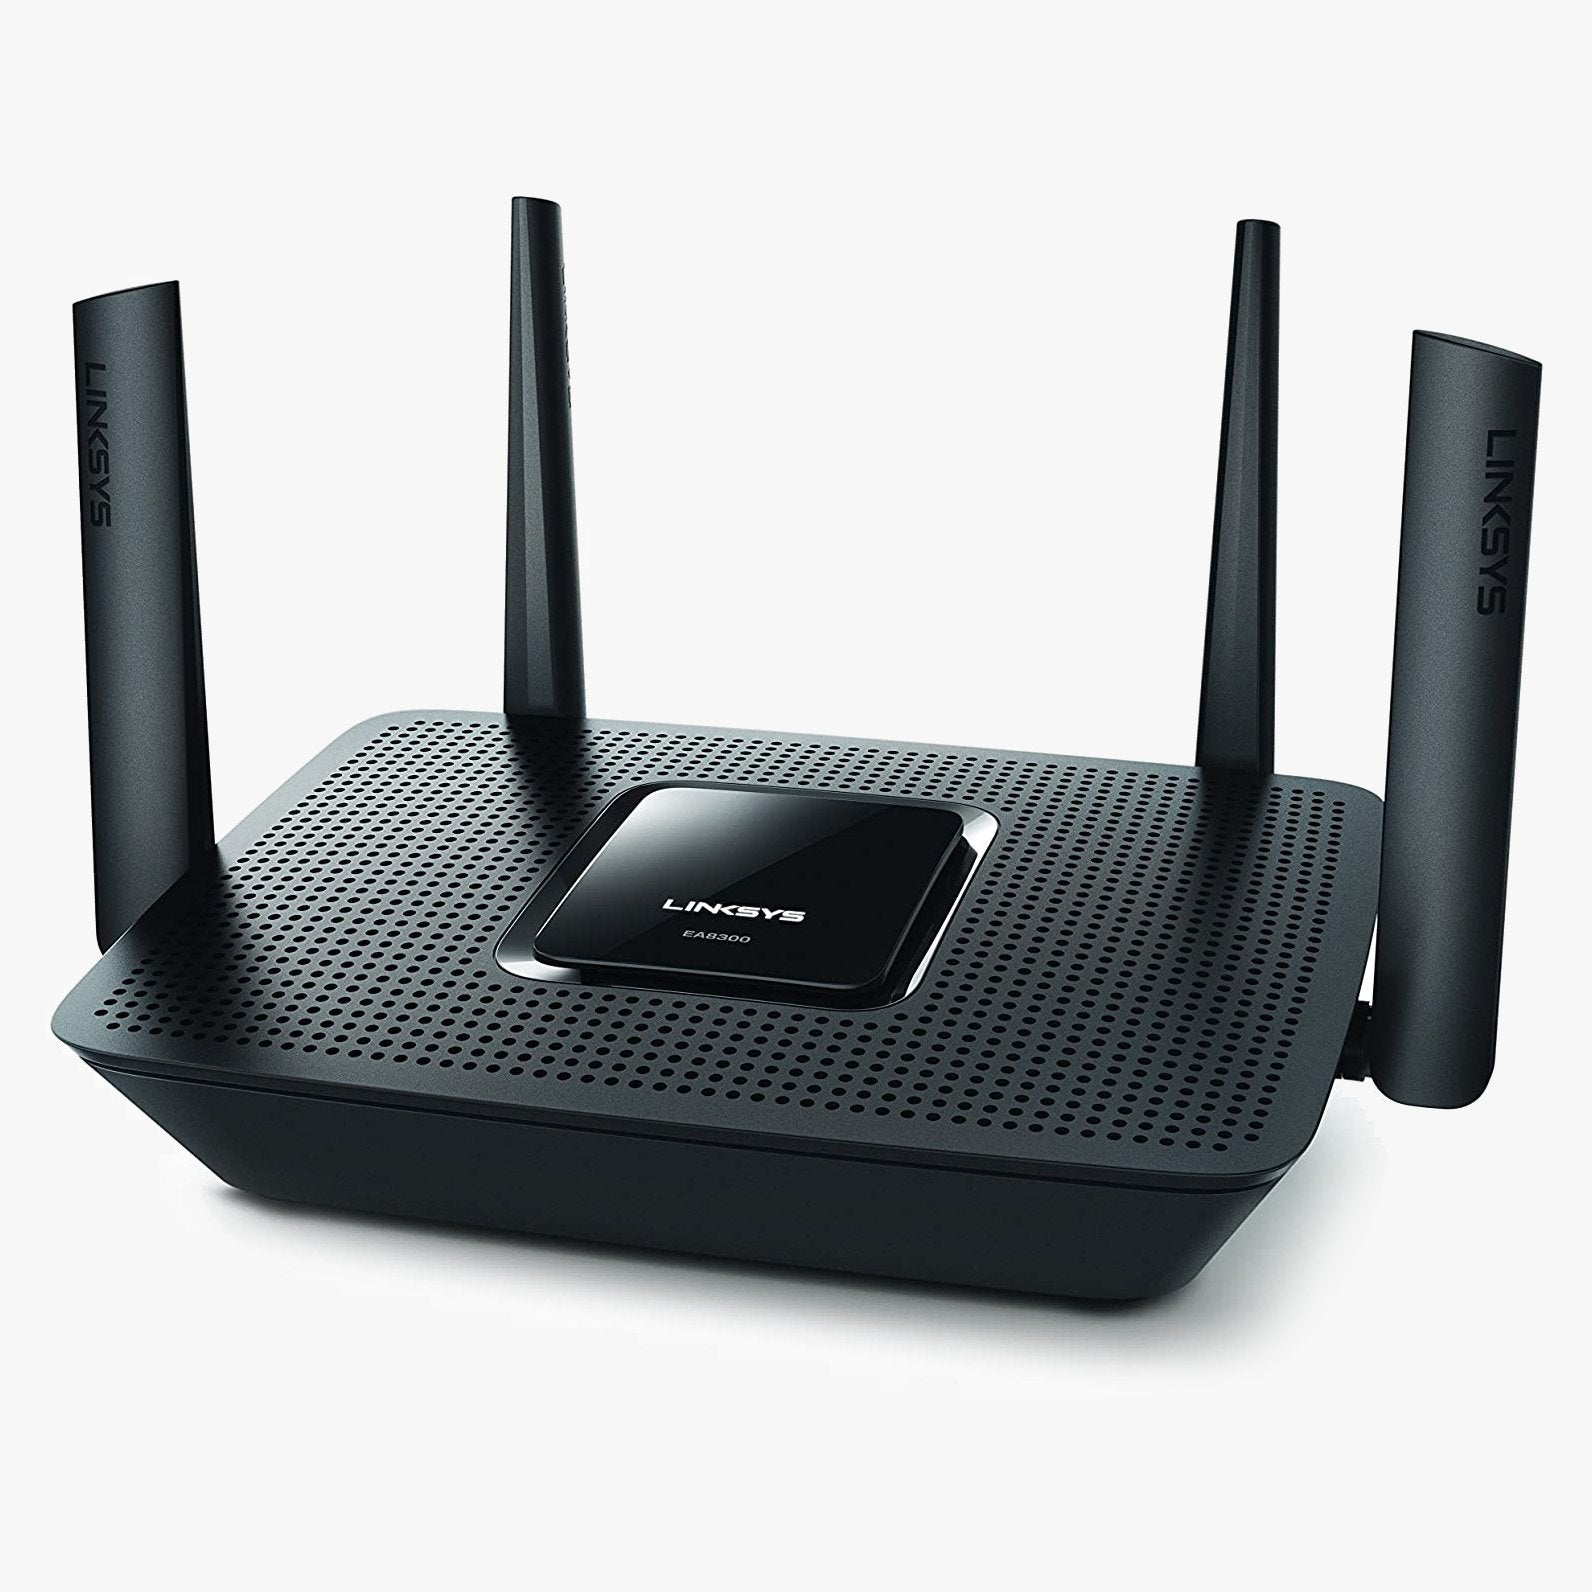 Linksys EA8300 Tri-Band AC2200 WiFi Router